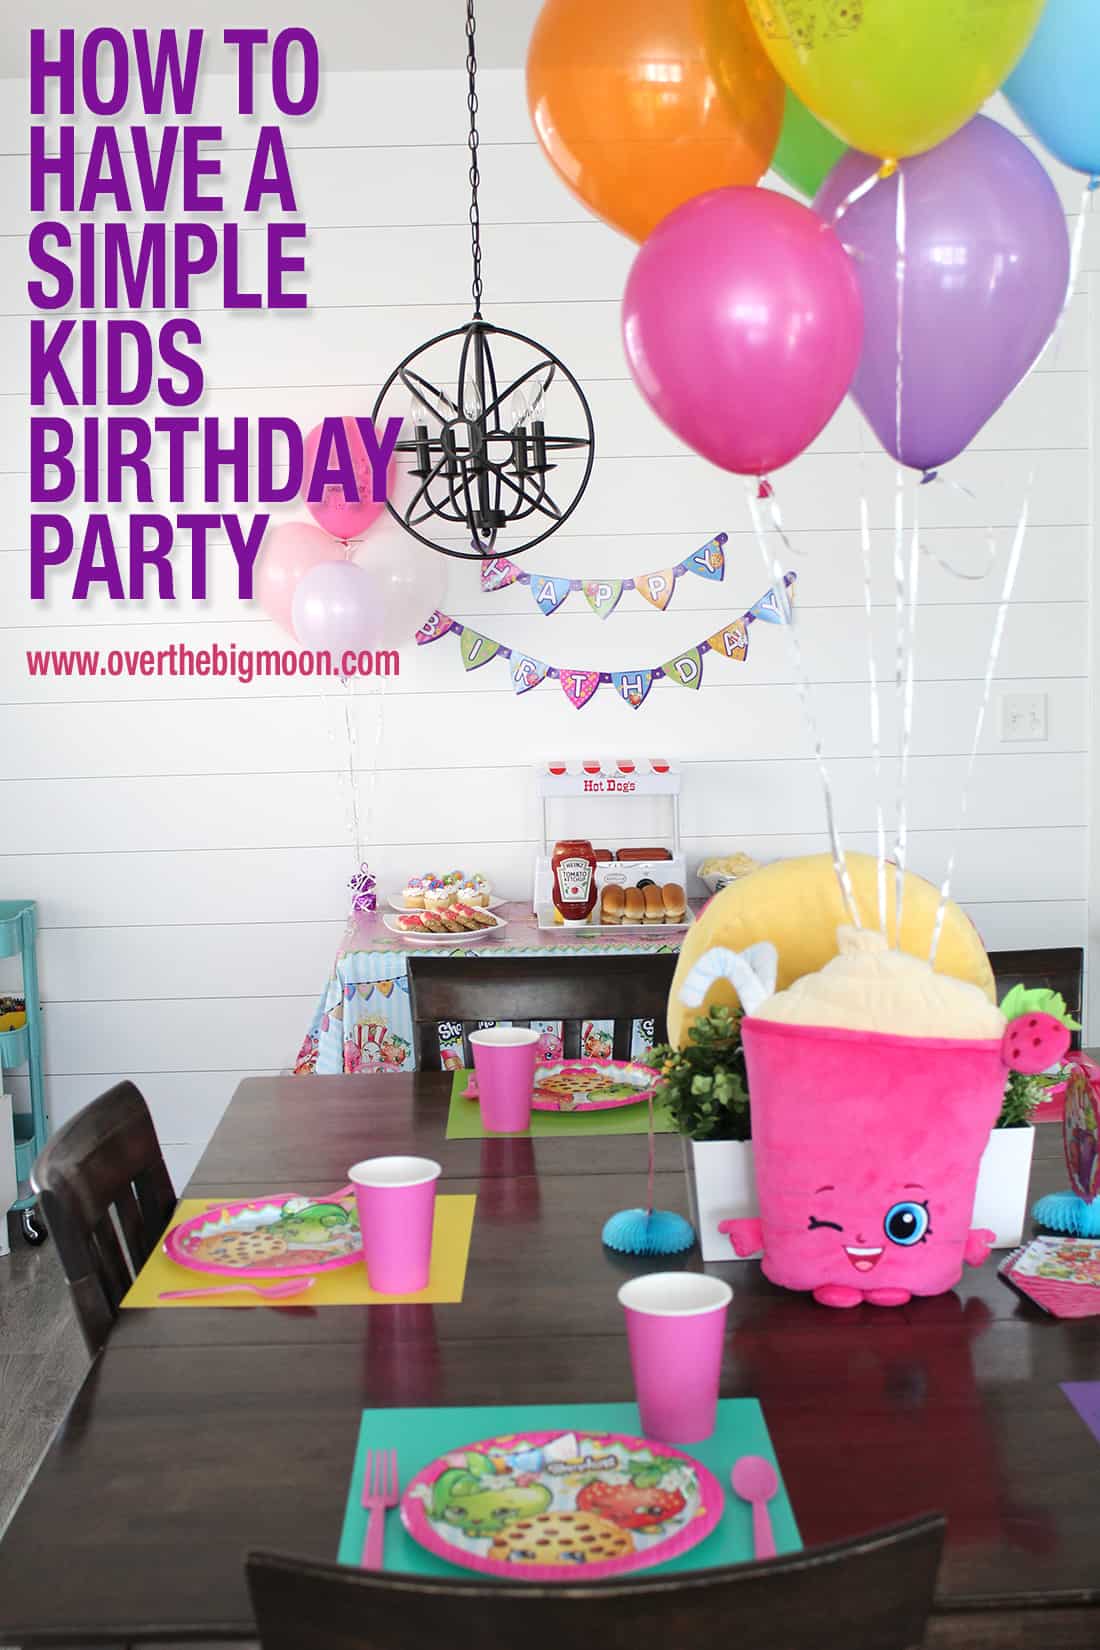 How to Have a Simple Kids Birthday Party - Over The Big Moon